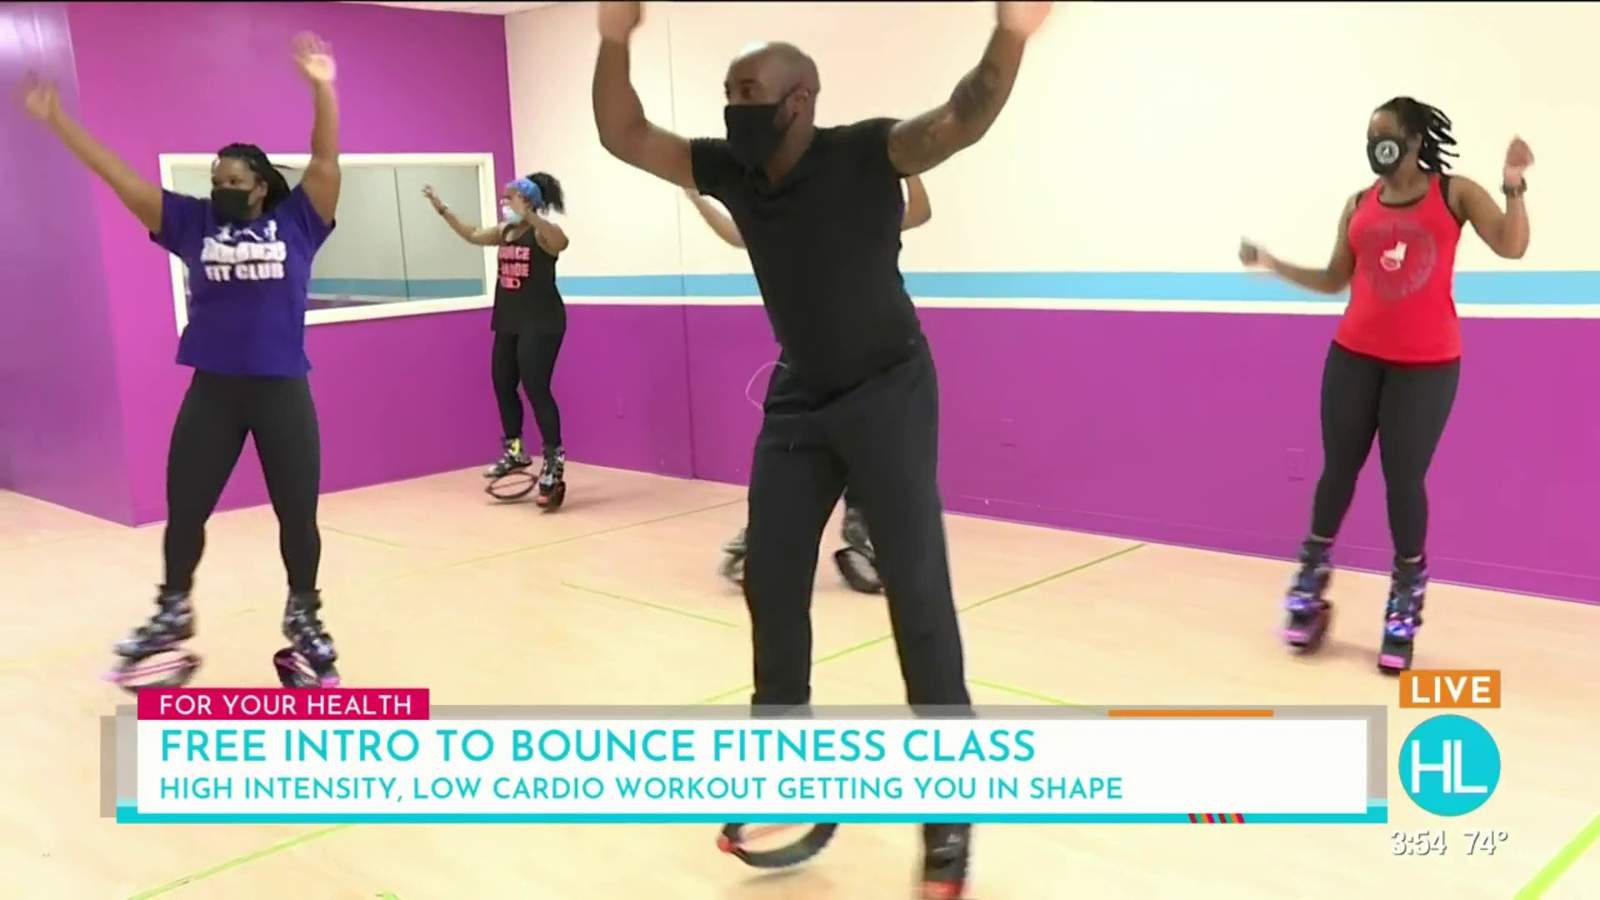 Bounce your way into a new body with a free and unique intro fitness class